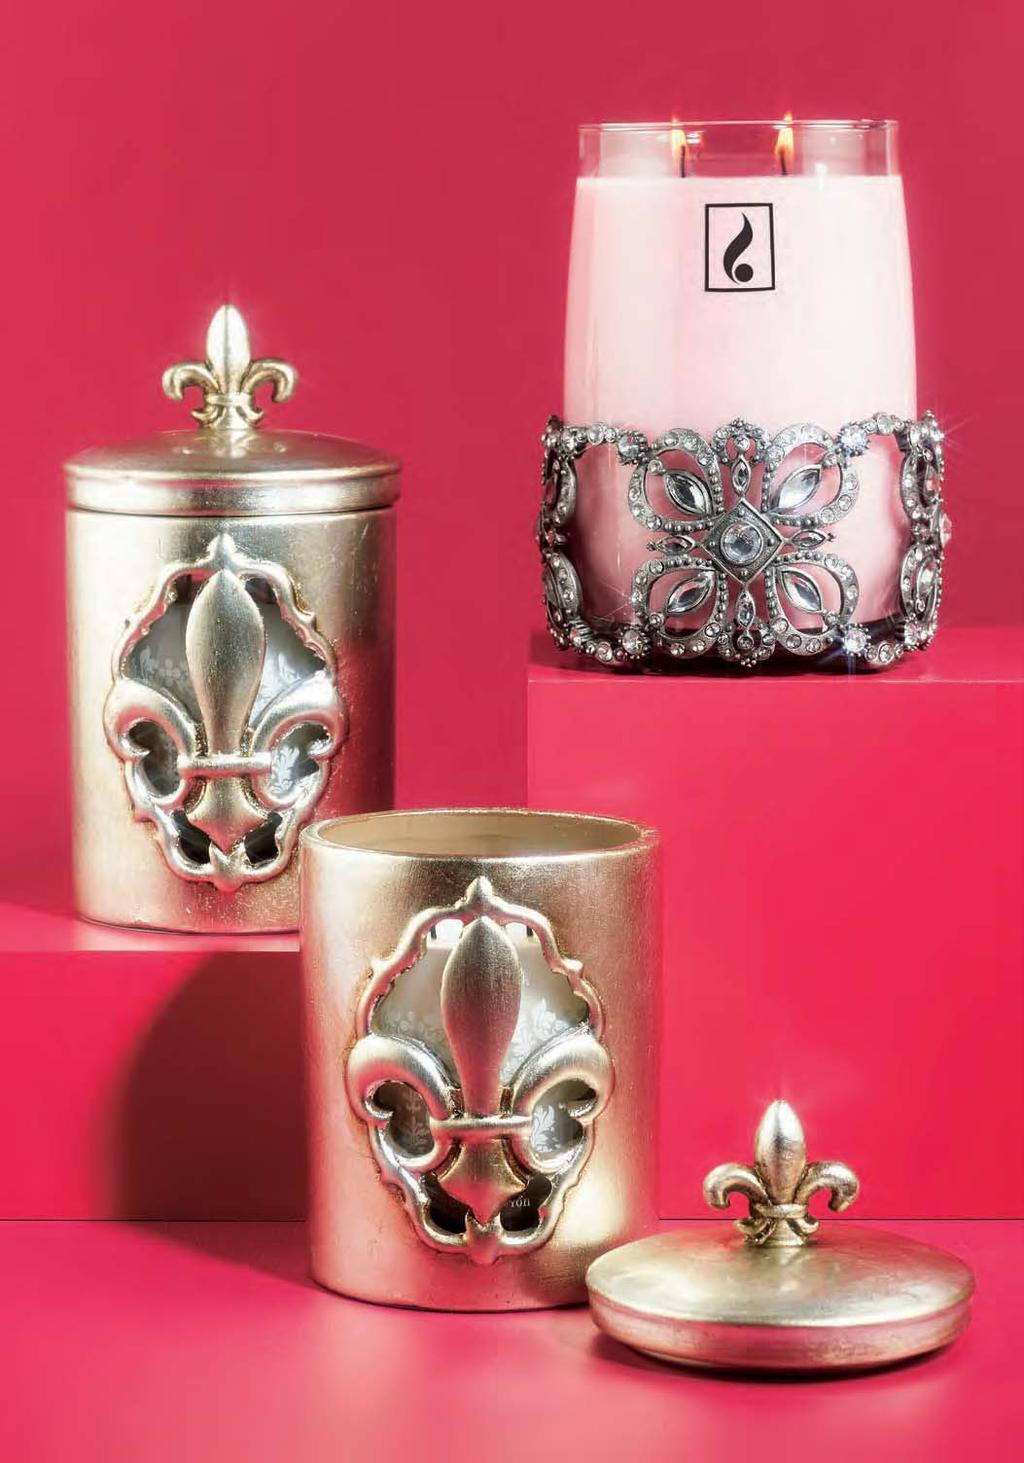 JEWELED CANDLE RING Pewter and rhinestones. 82959 $27.98 4 1/2 D X 2 1/2 H Fits 26, 16 and 8 oz. Heritage, Bella and Pillar Series.